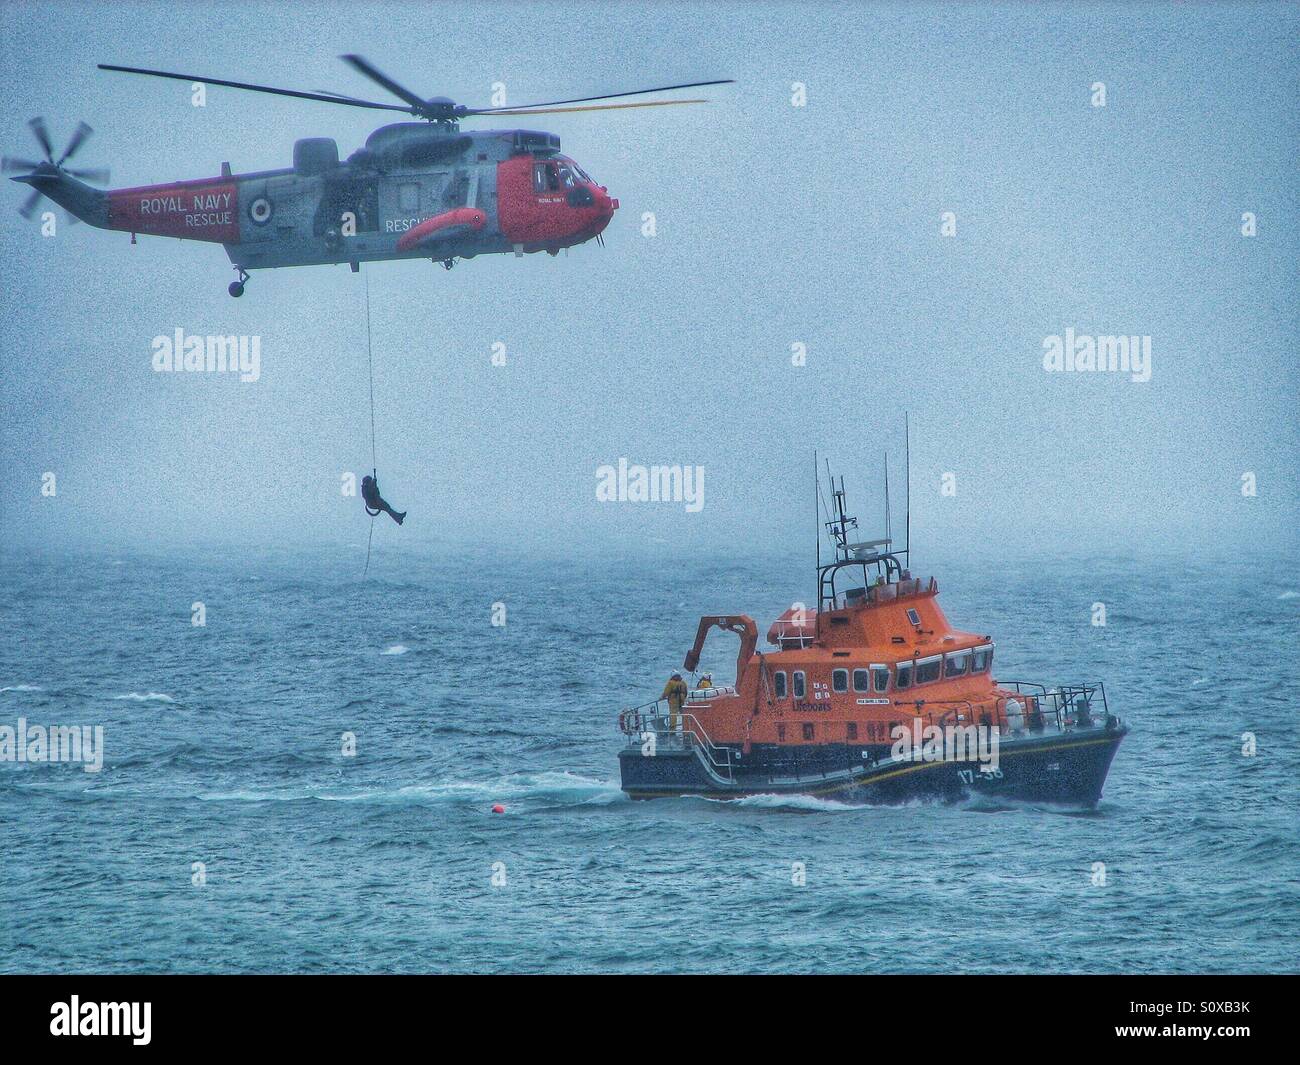 A Royal Navy Air and Sea Rescue helicopter lowering a winch man onto a waiting RNLI lifeboat on a misty ocean. Stock Photo